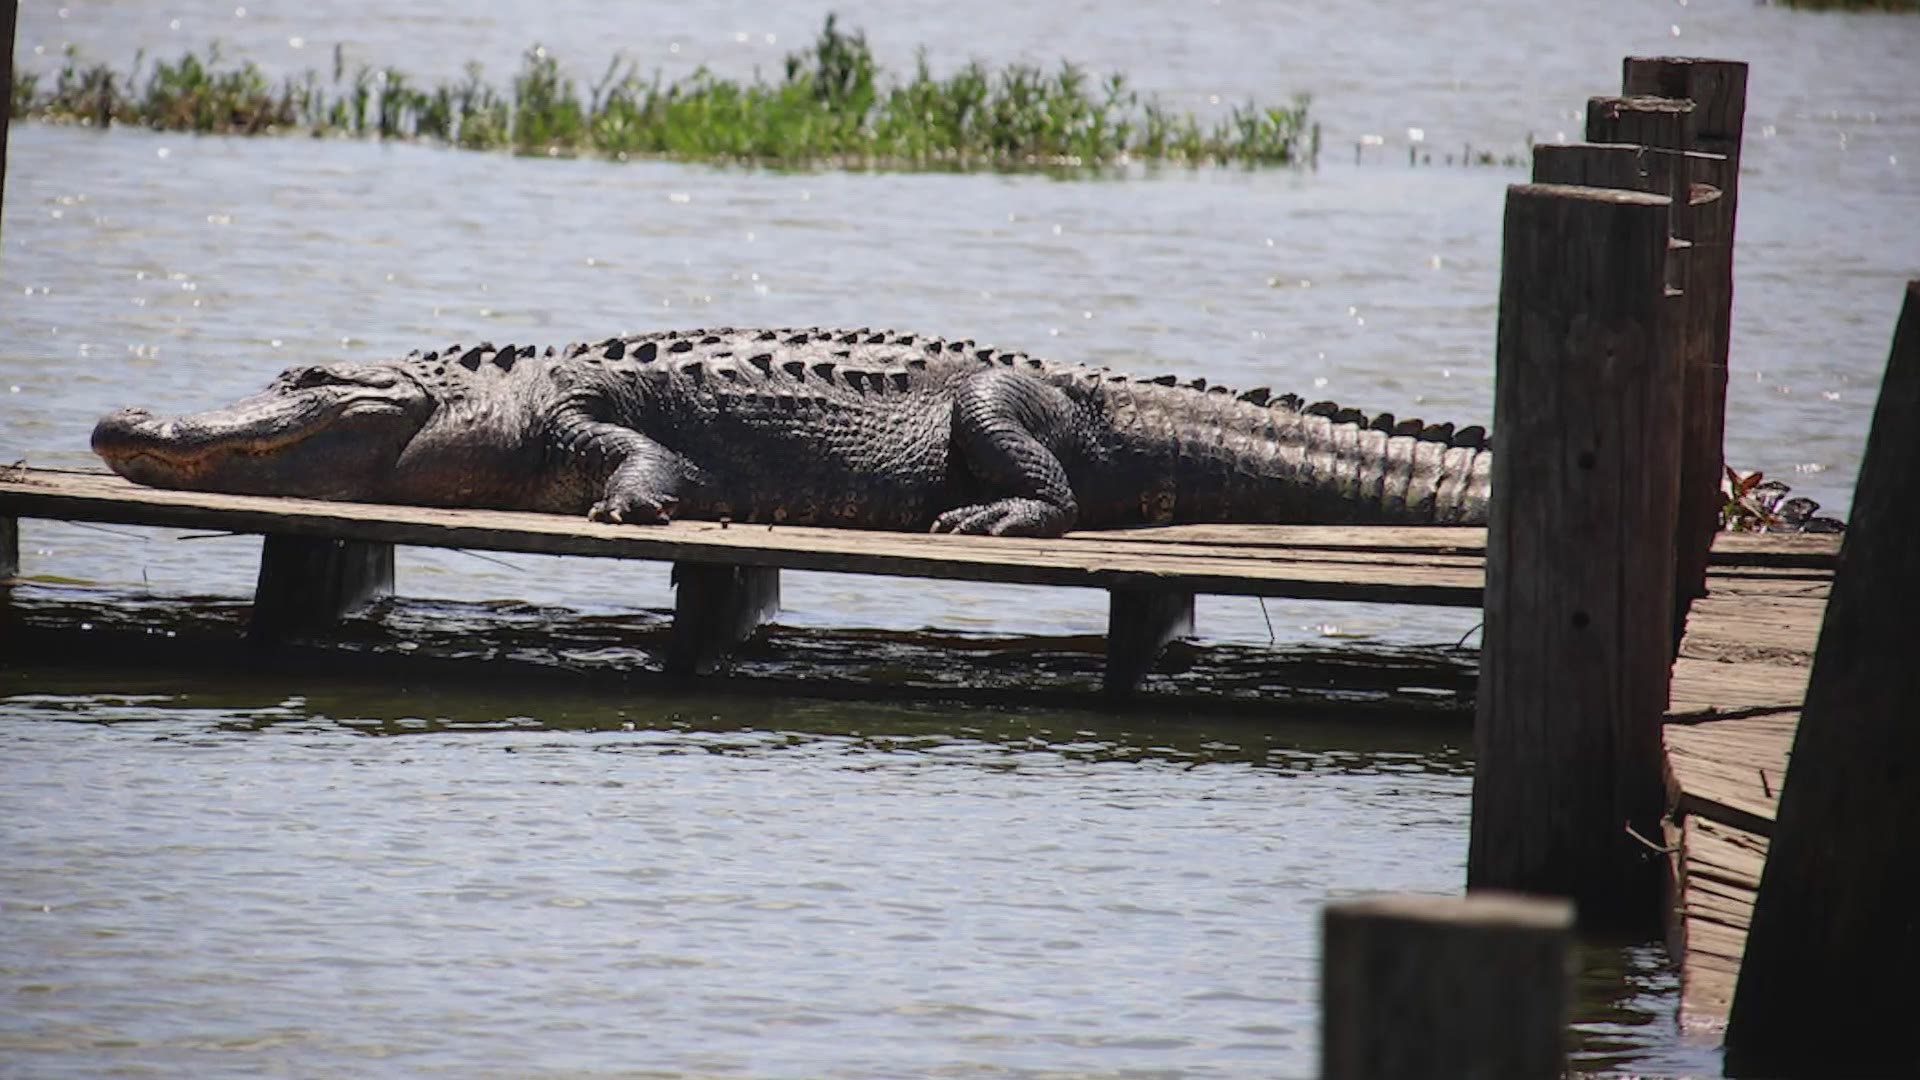 This is at least the second alligator spotting in North Texas this year.